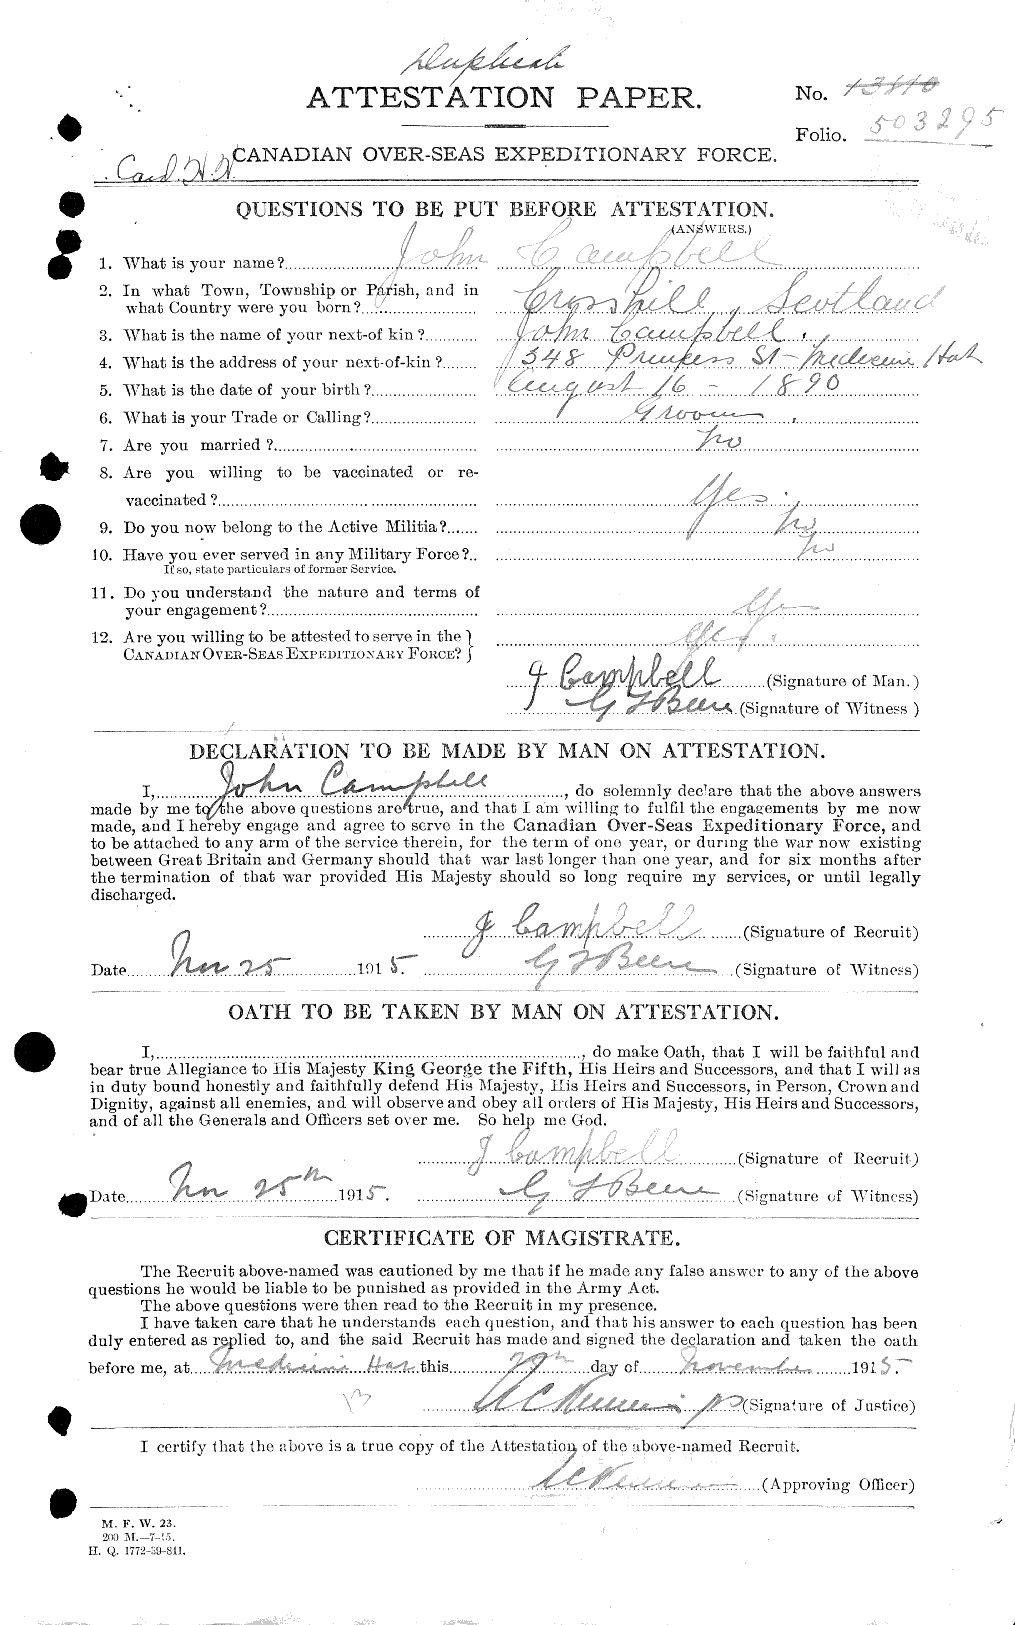 Personnel Records of the First World War - CEF 006841a